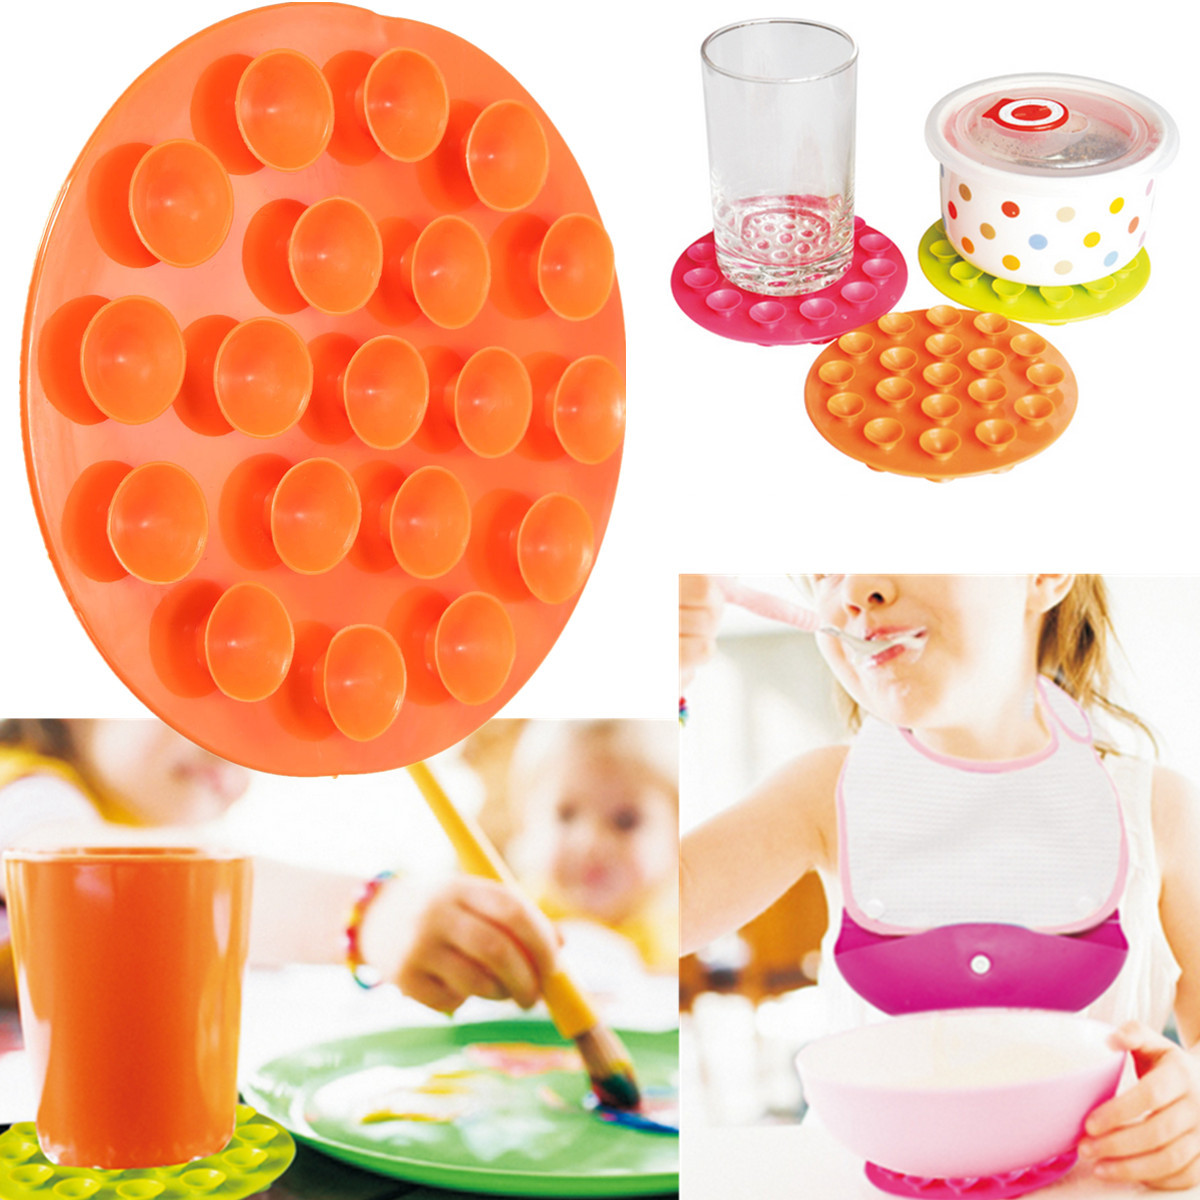 Kids-Baby-Bowl-Pad-Milk-Bottle-Silicone-Magical-Anti-Slip-Meal-Suction-Mat-Kitchen-Dishes-Dinnerware-961489